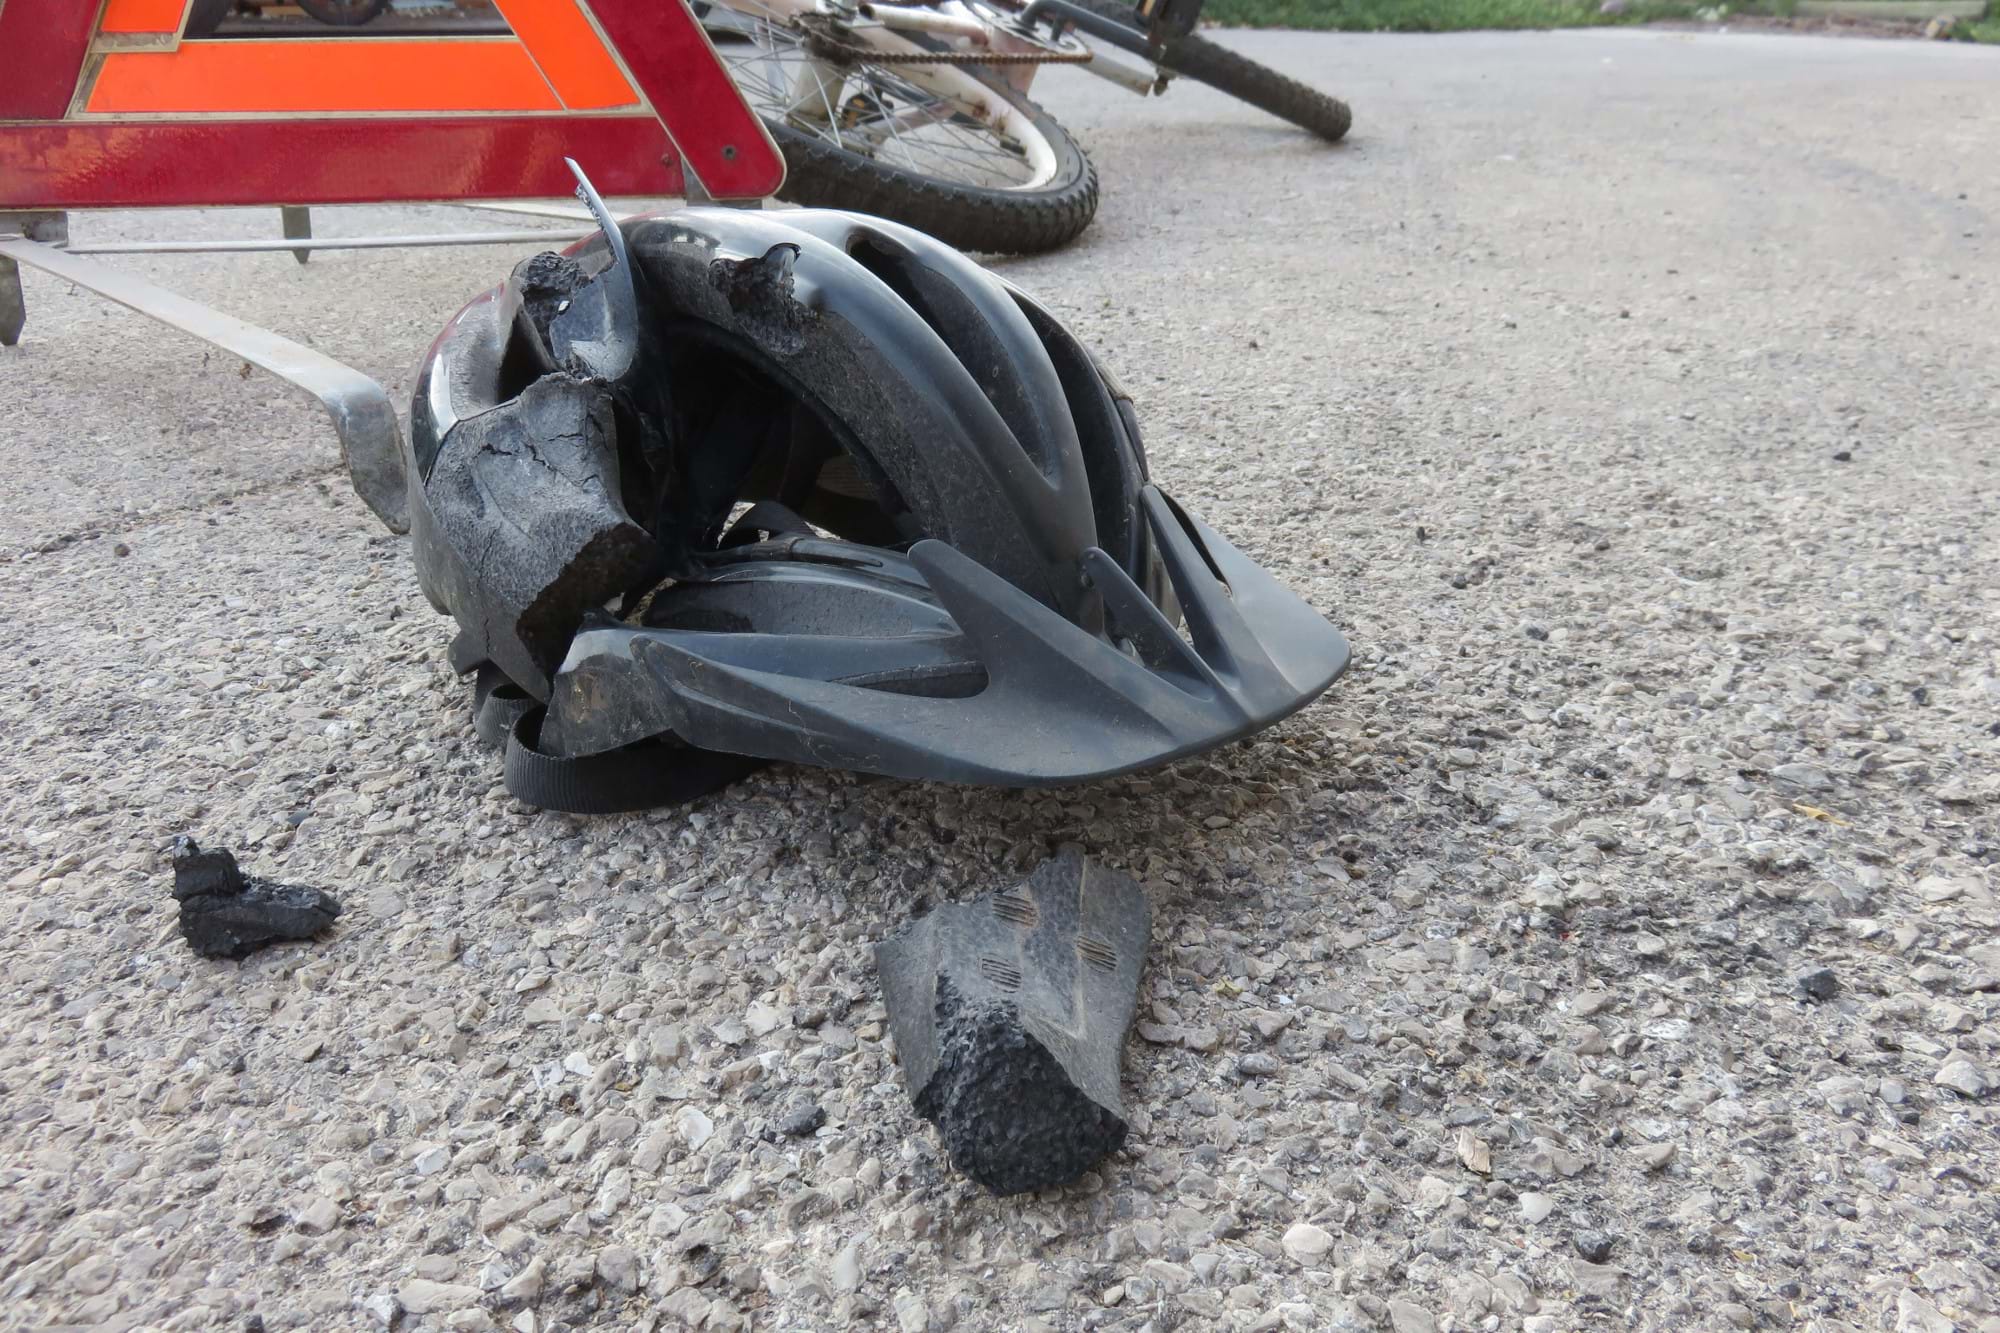 A bicycle helmet crushed on the road following a road traffic accident